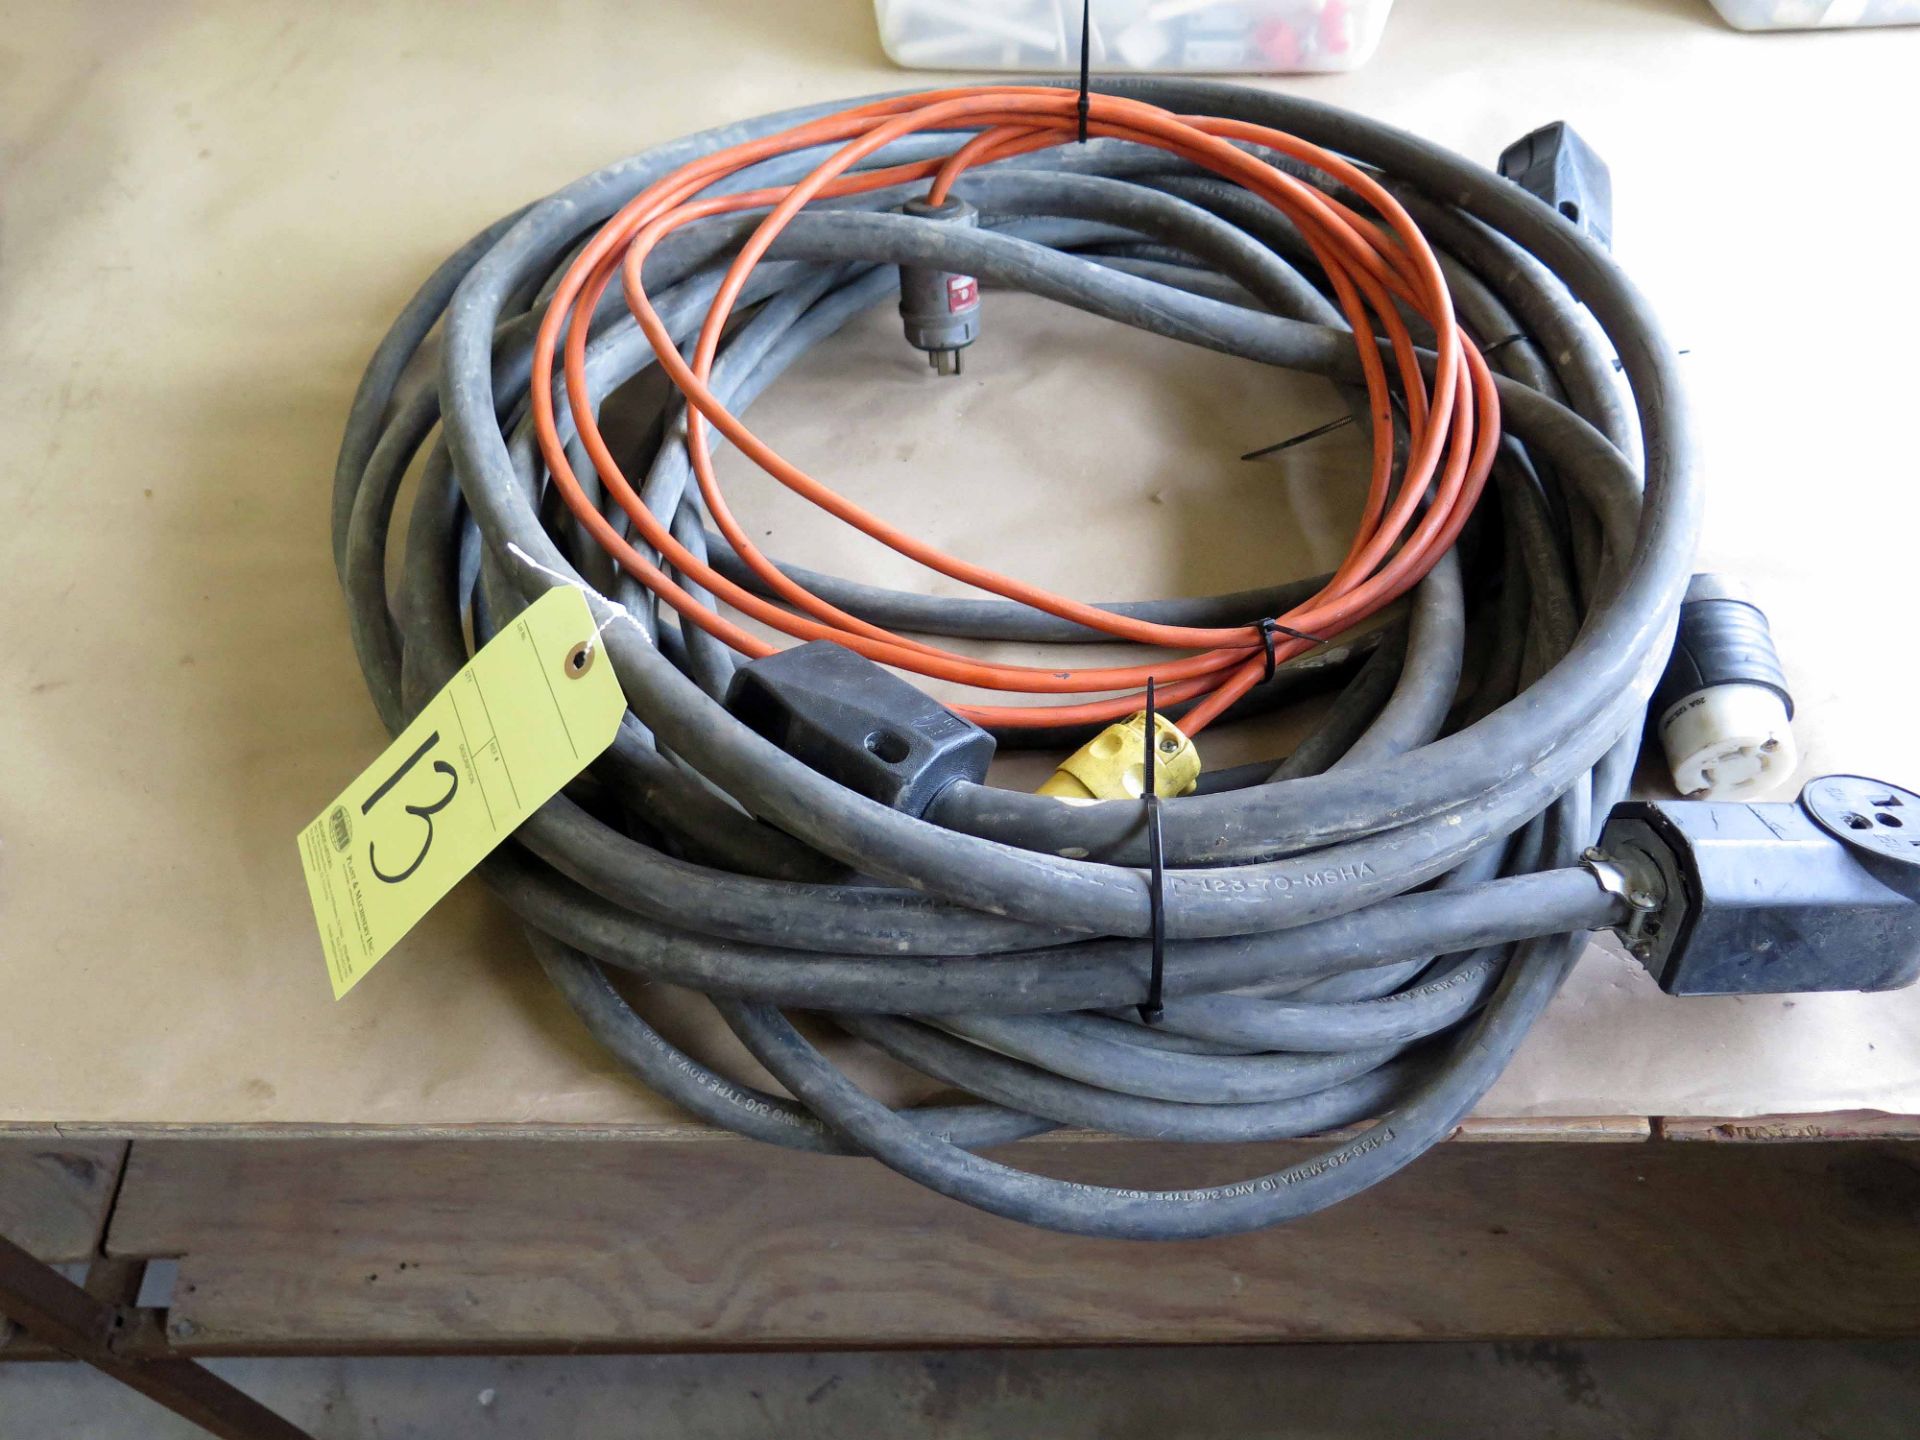 LOT OF ELECTRIC CABLES (3) & EXTENSION CORDS